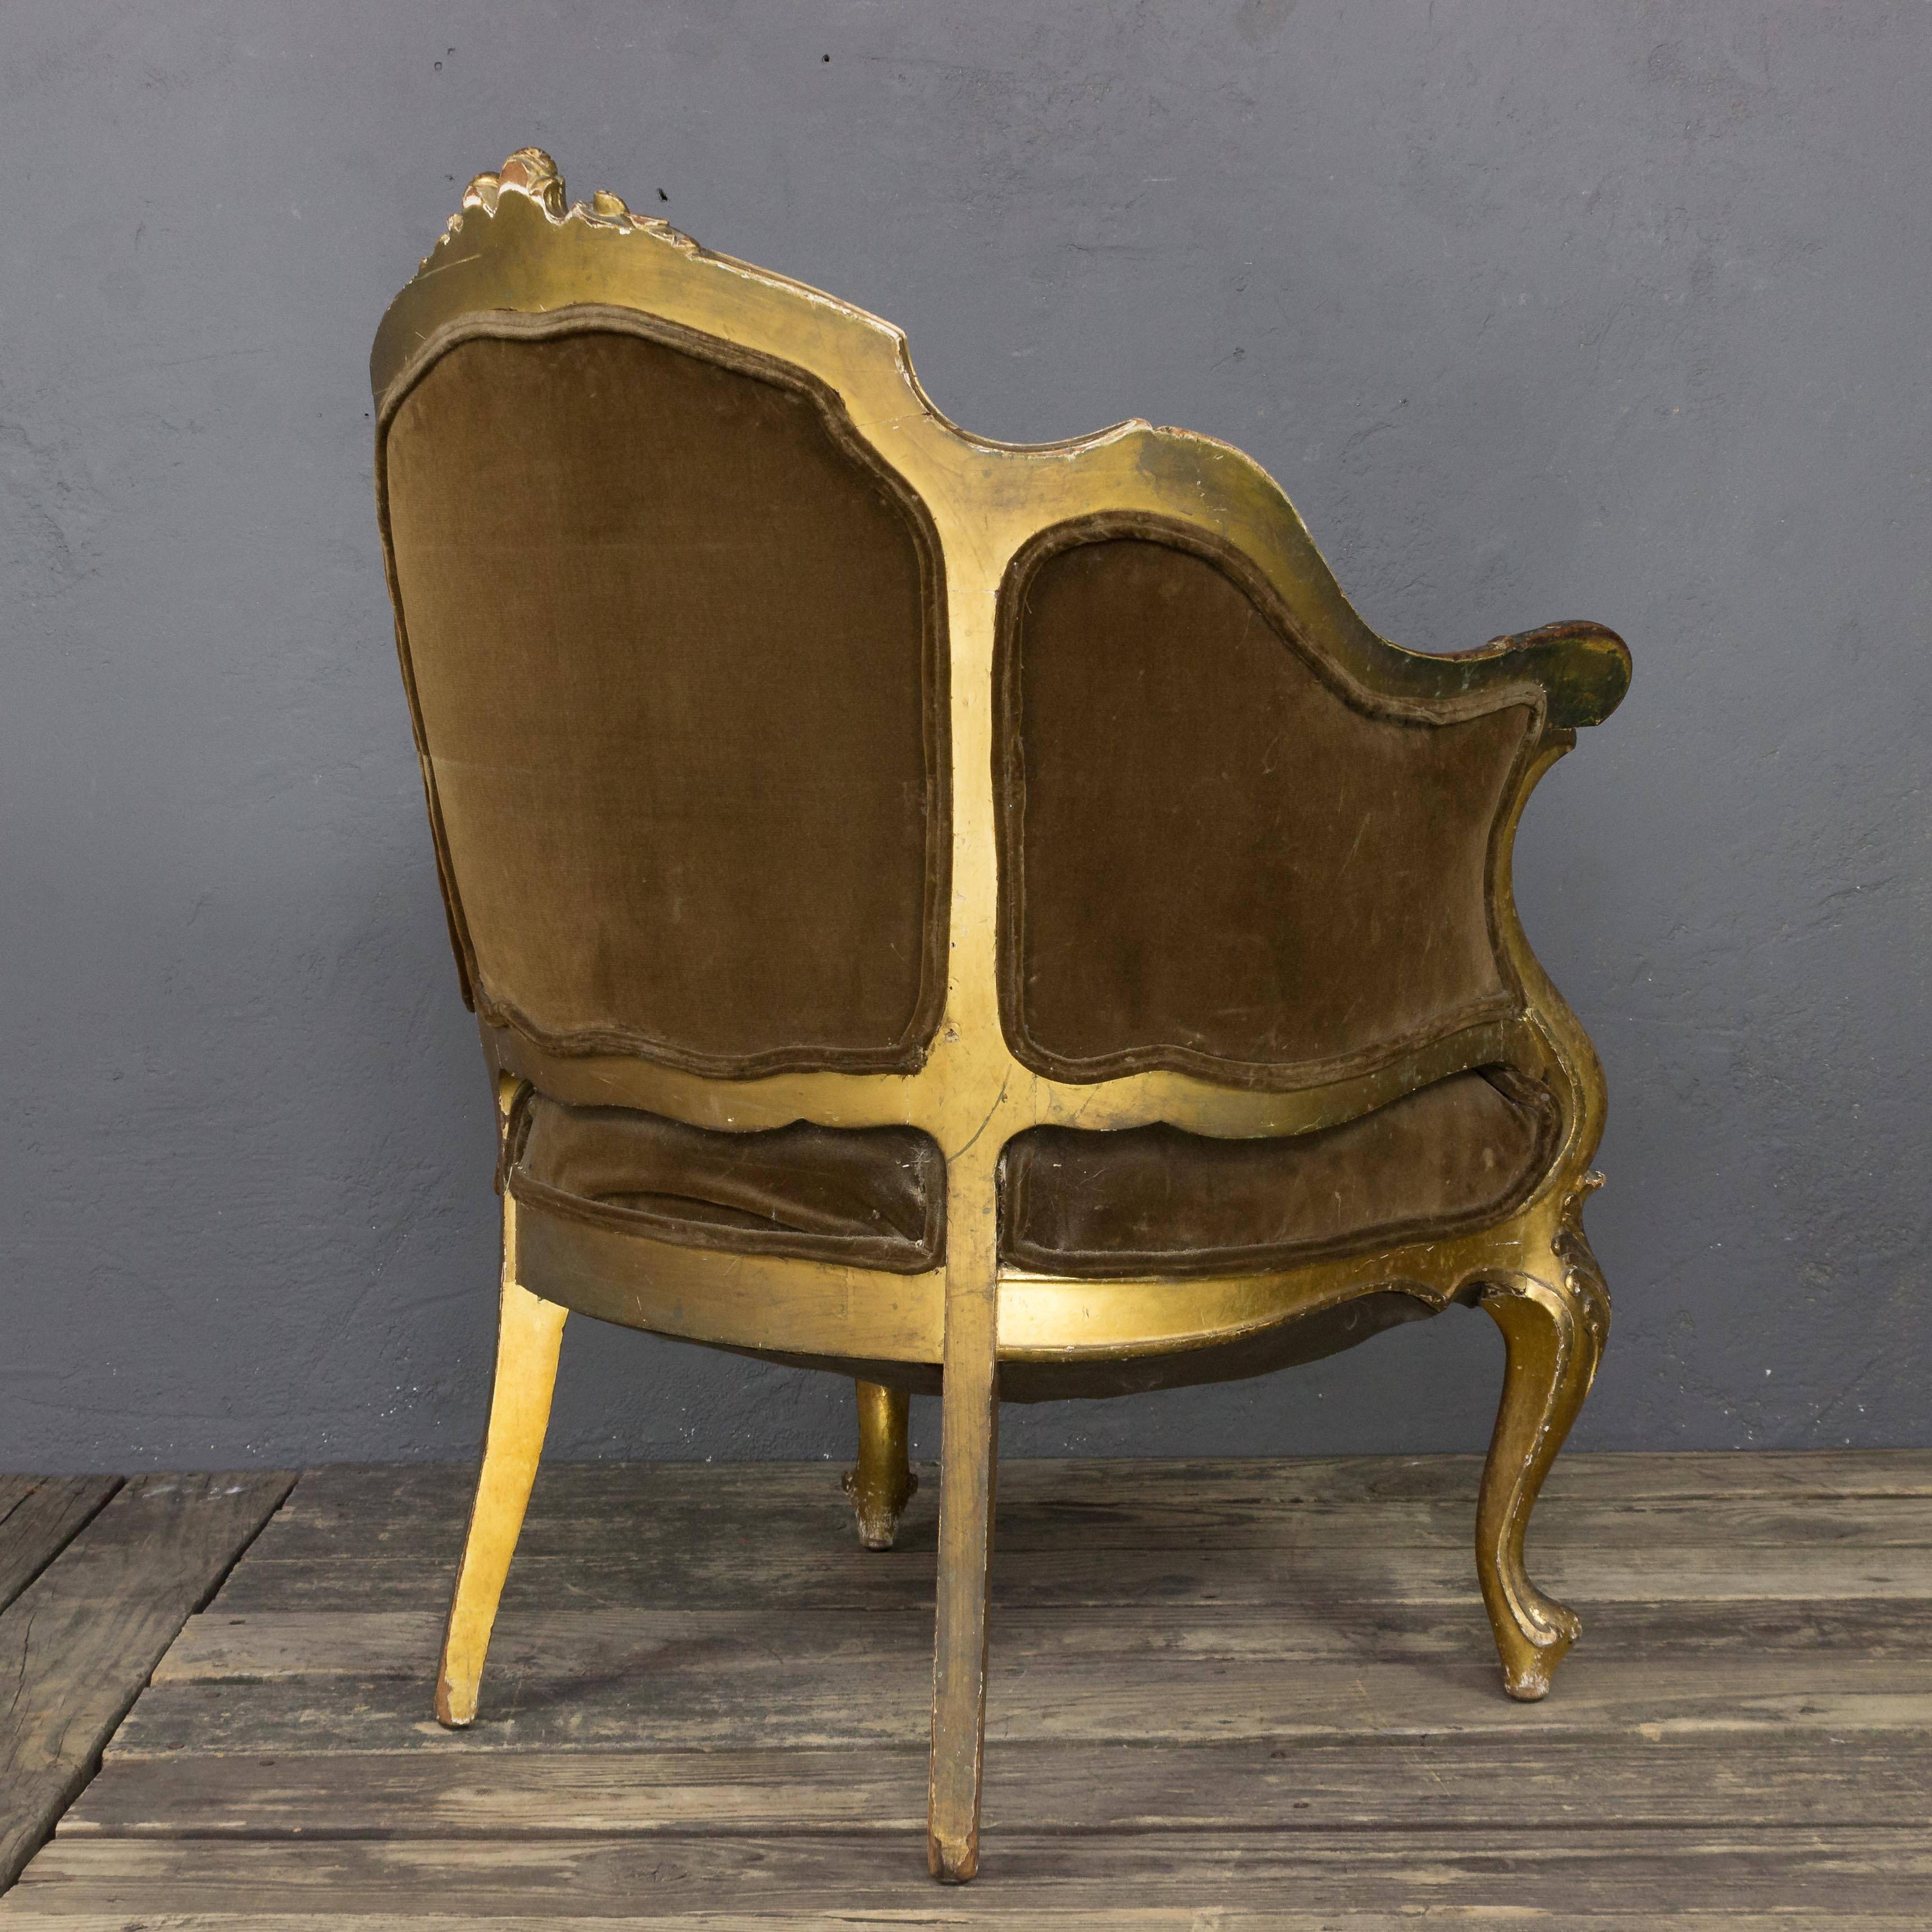 French 19th Century Rococo Revival Giltwood Armchair For Sale 2